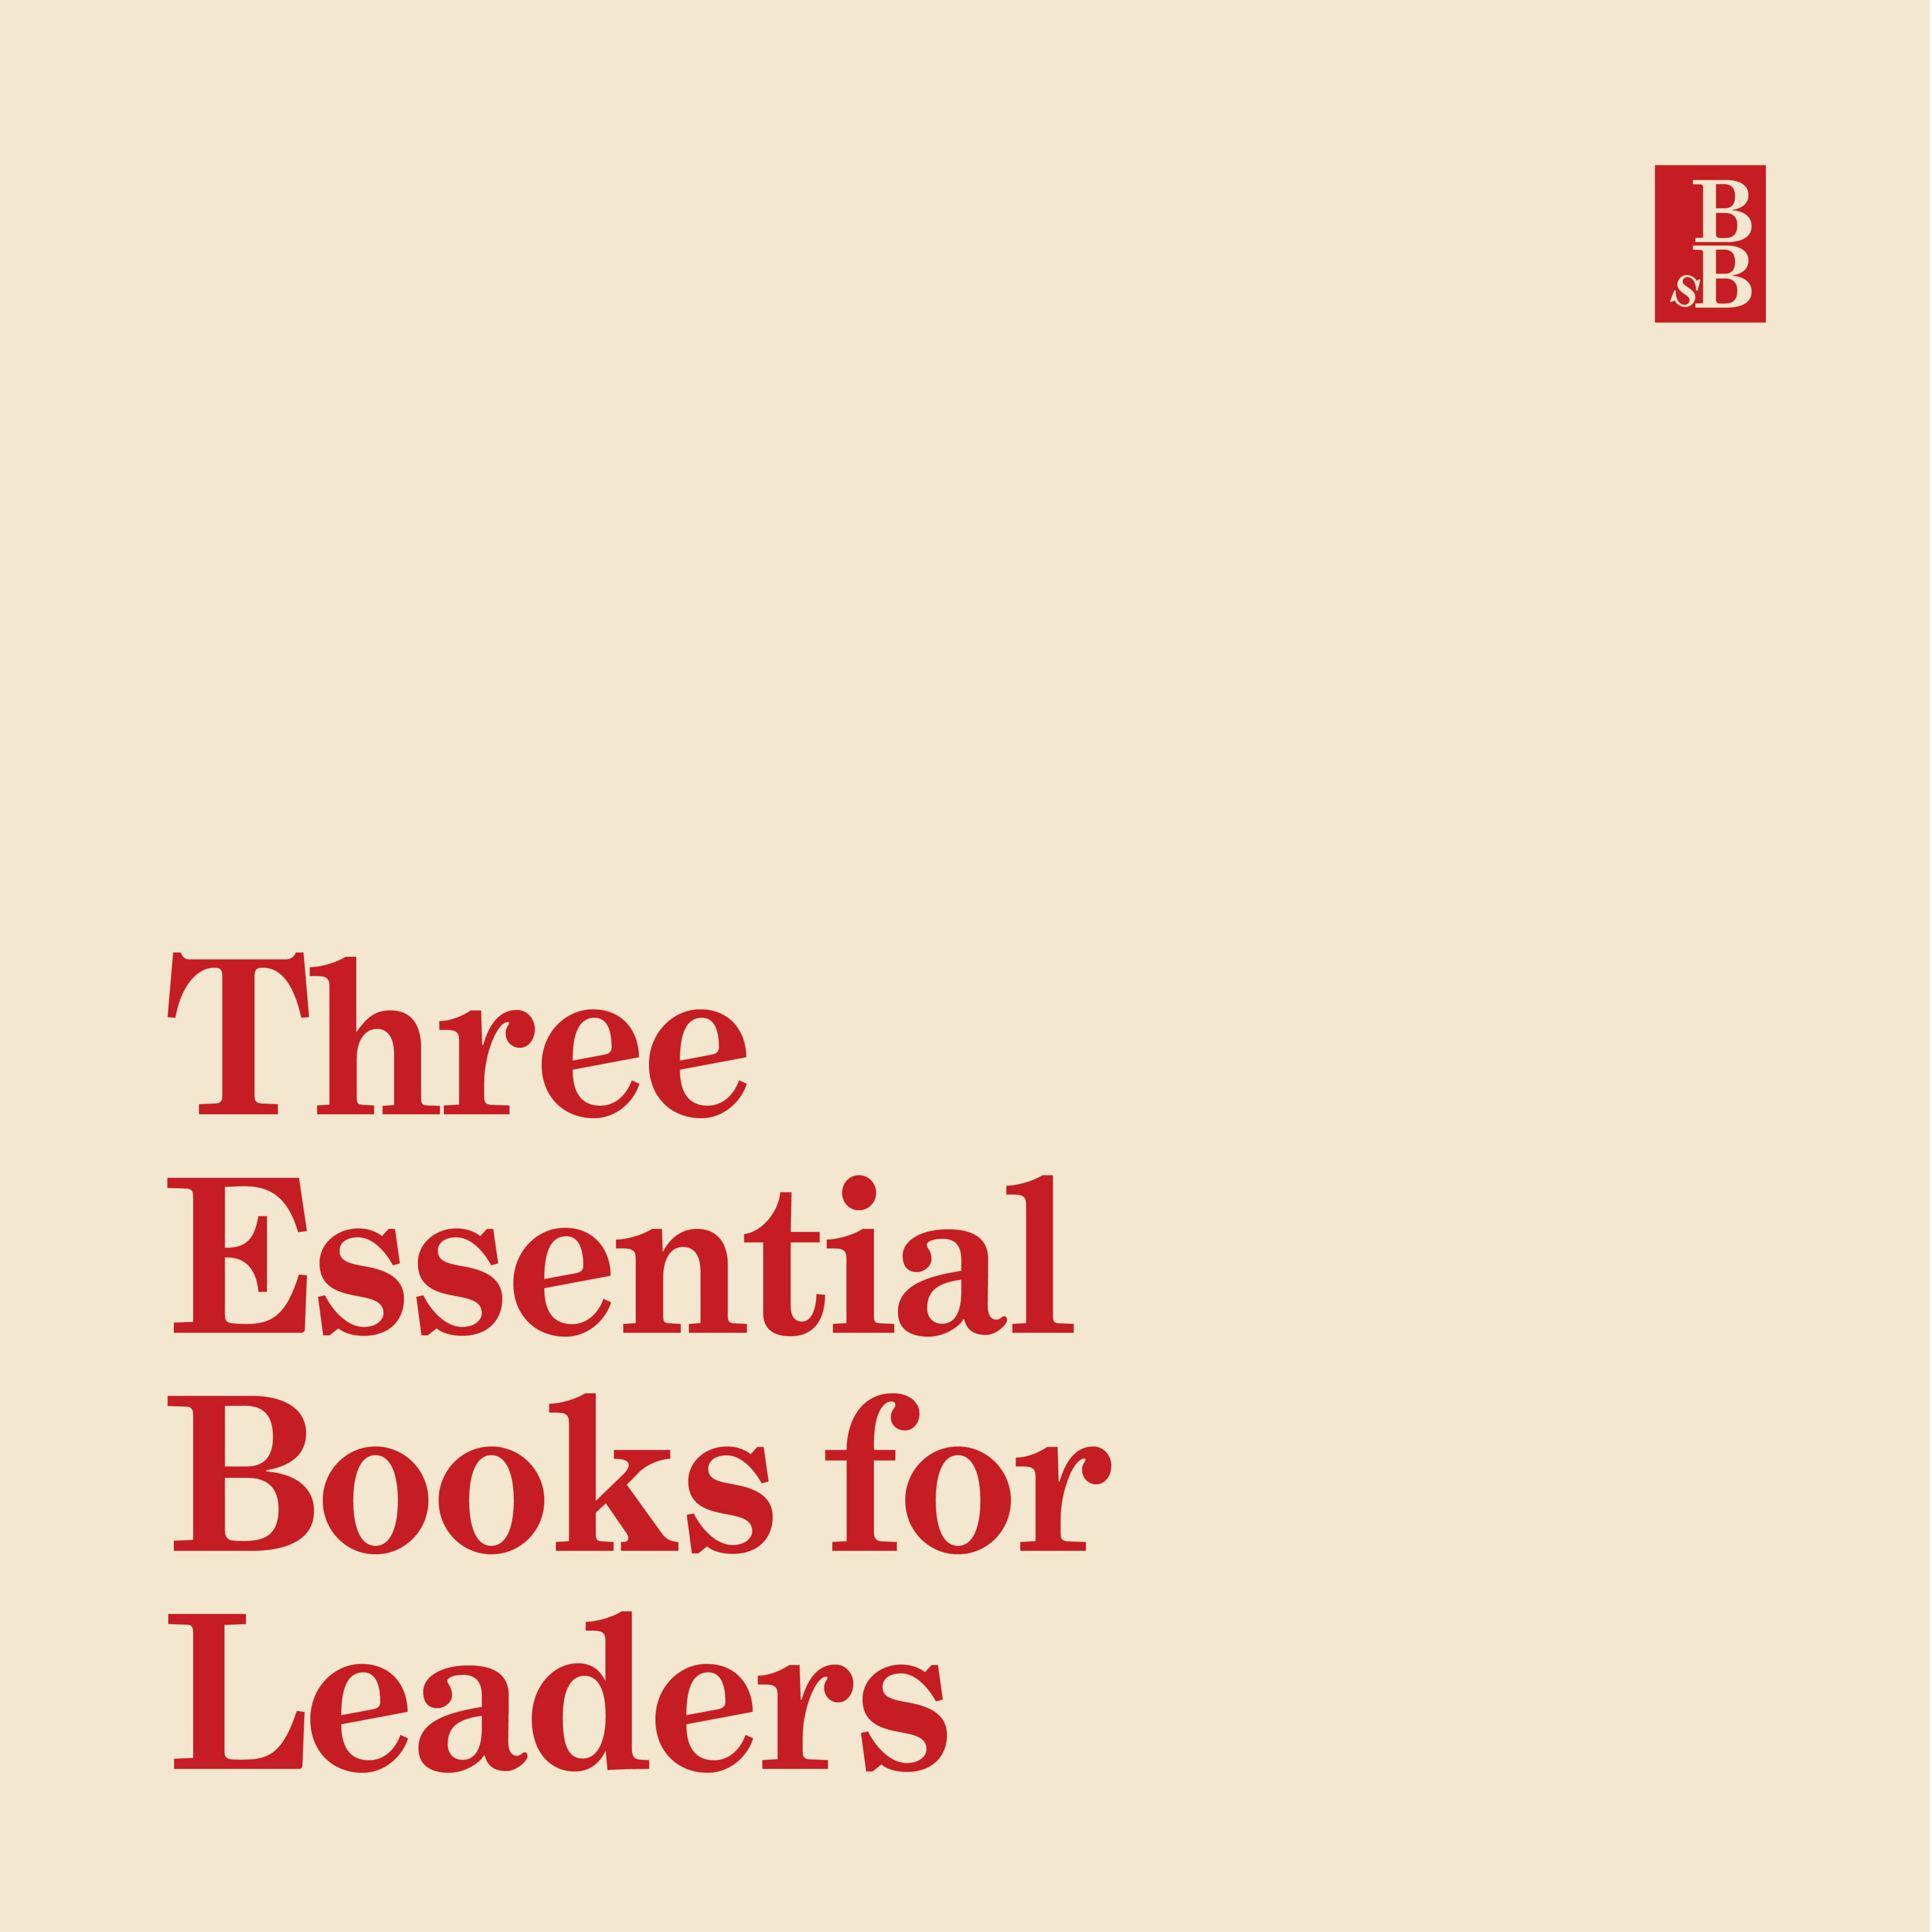 Three essential books that all leaders should read Image